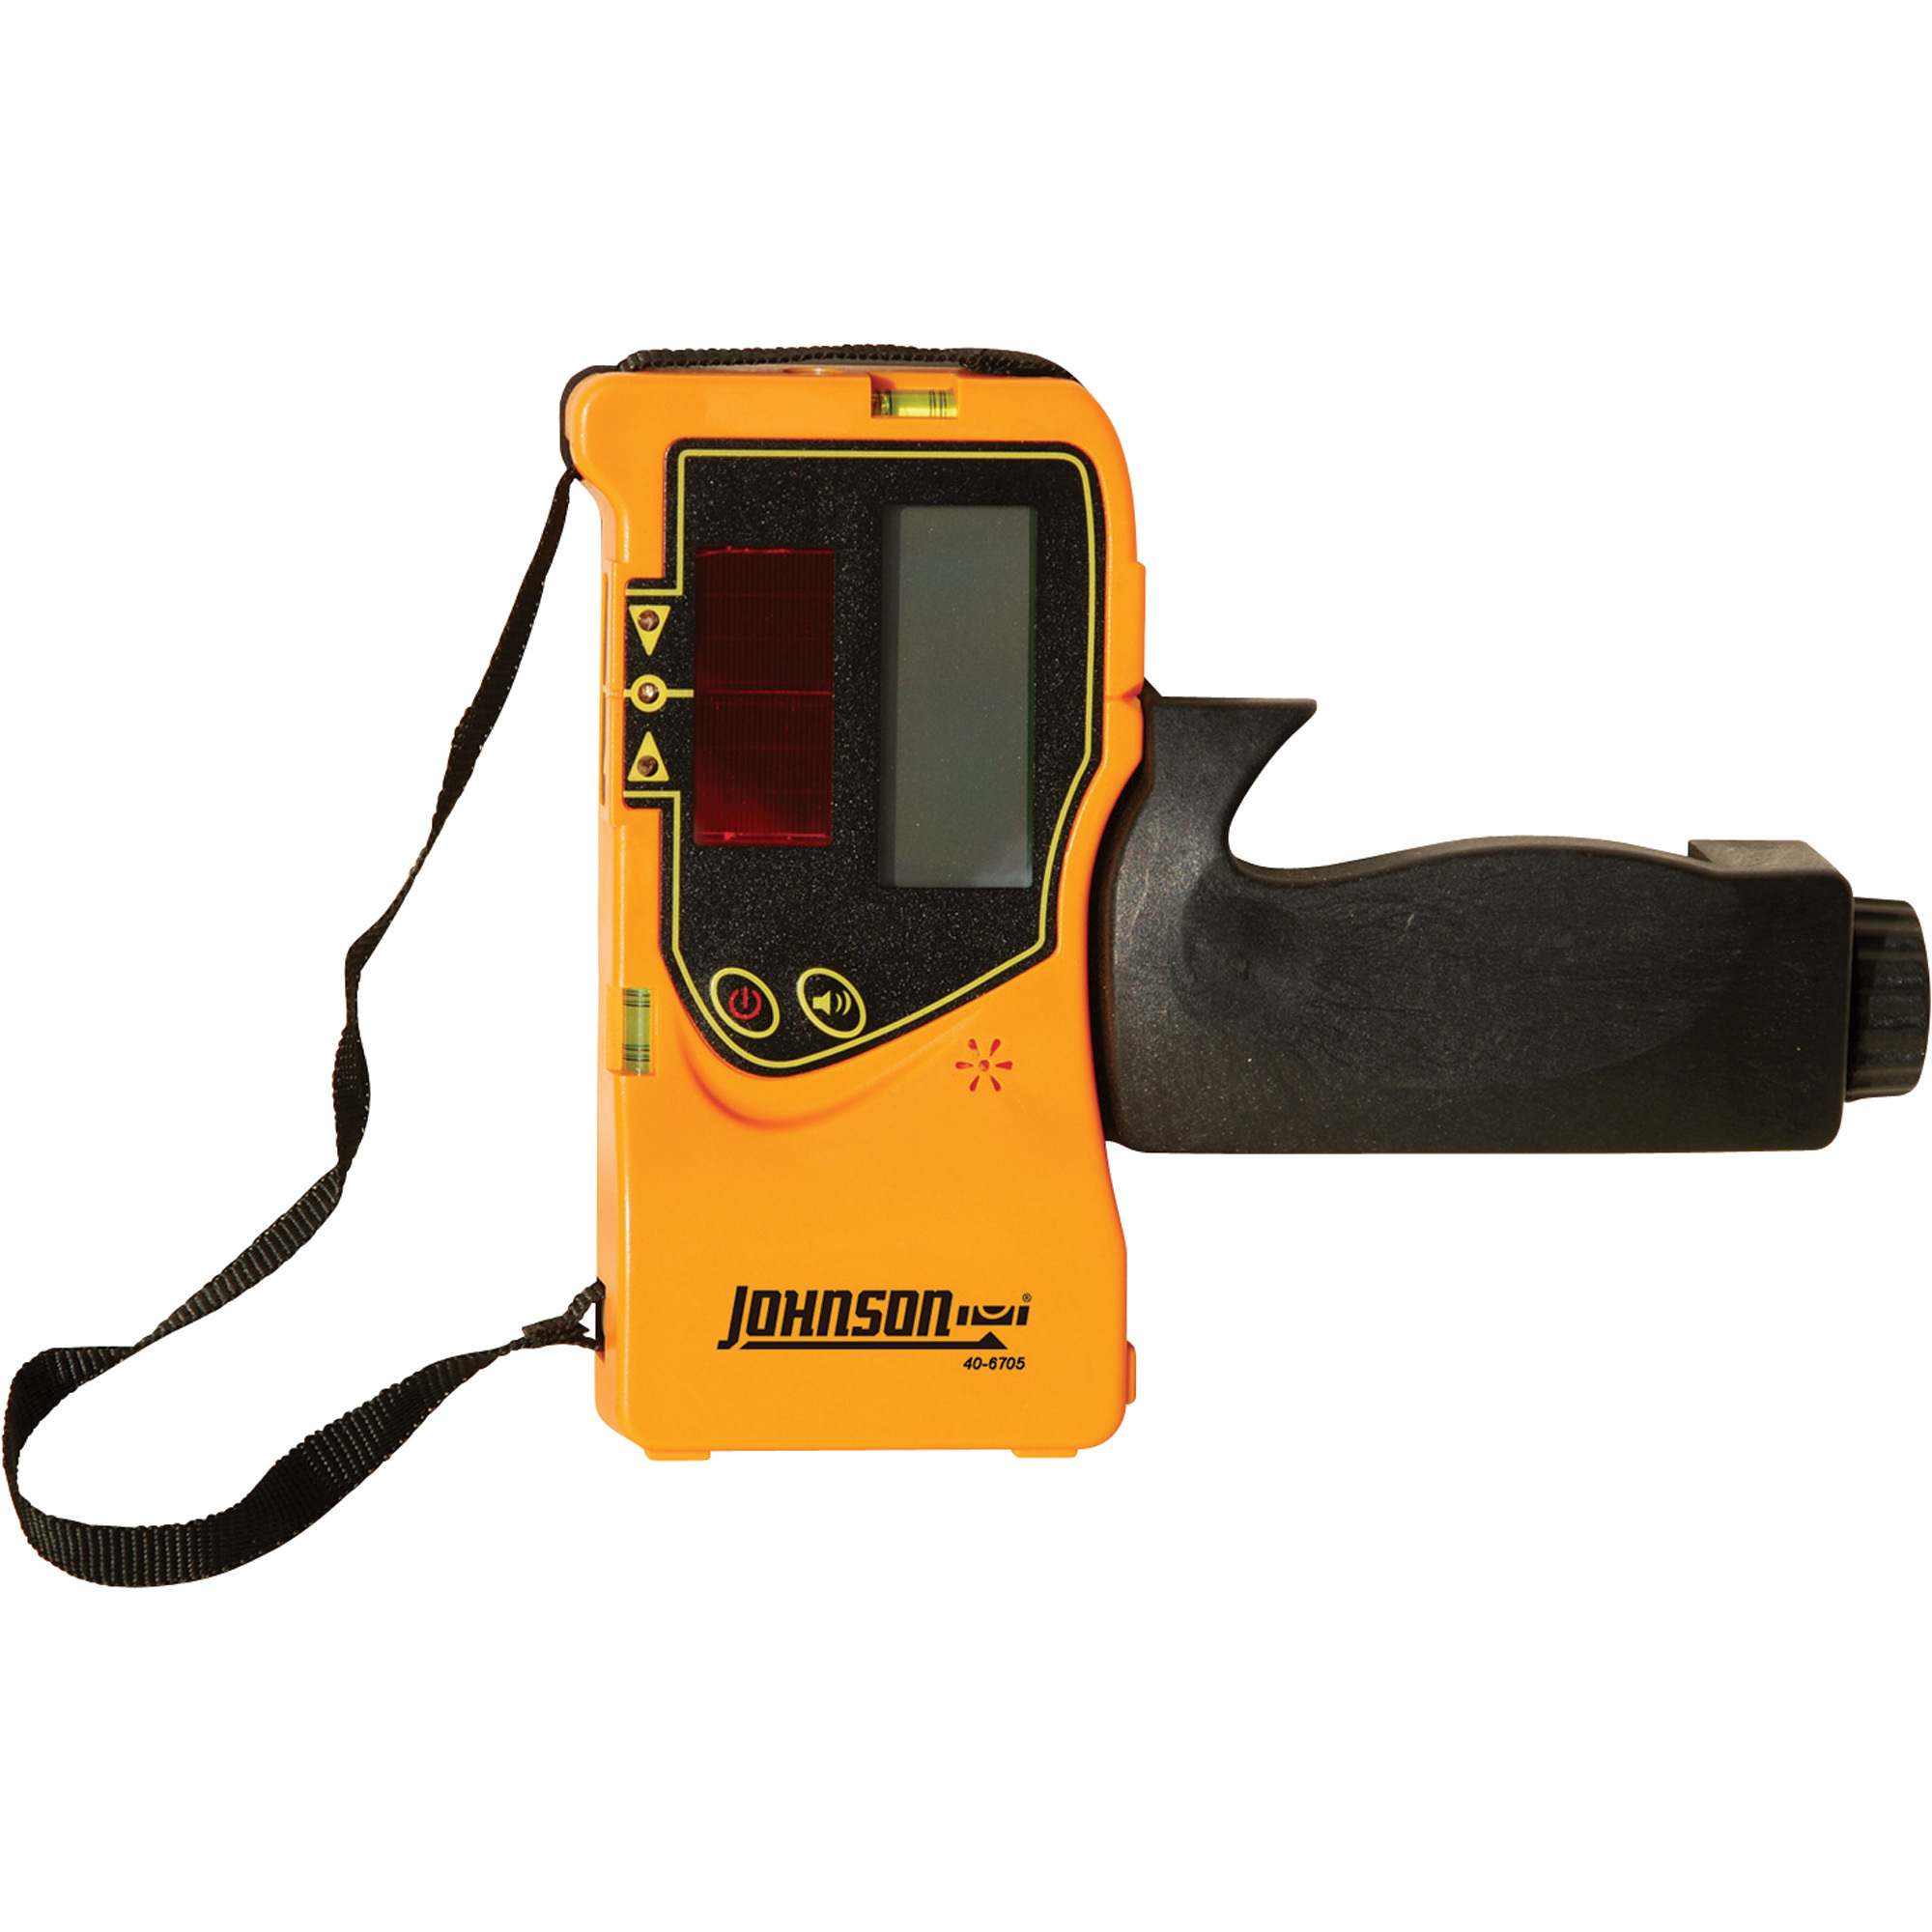 Johnson Level & Tool Pulse Laser Detector with Clamp, Model 40-6780